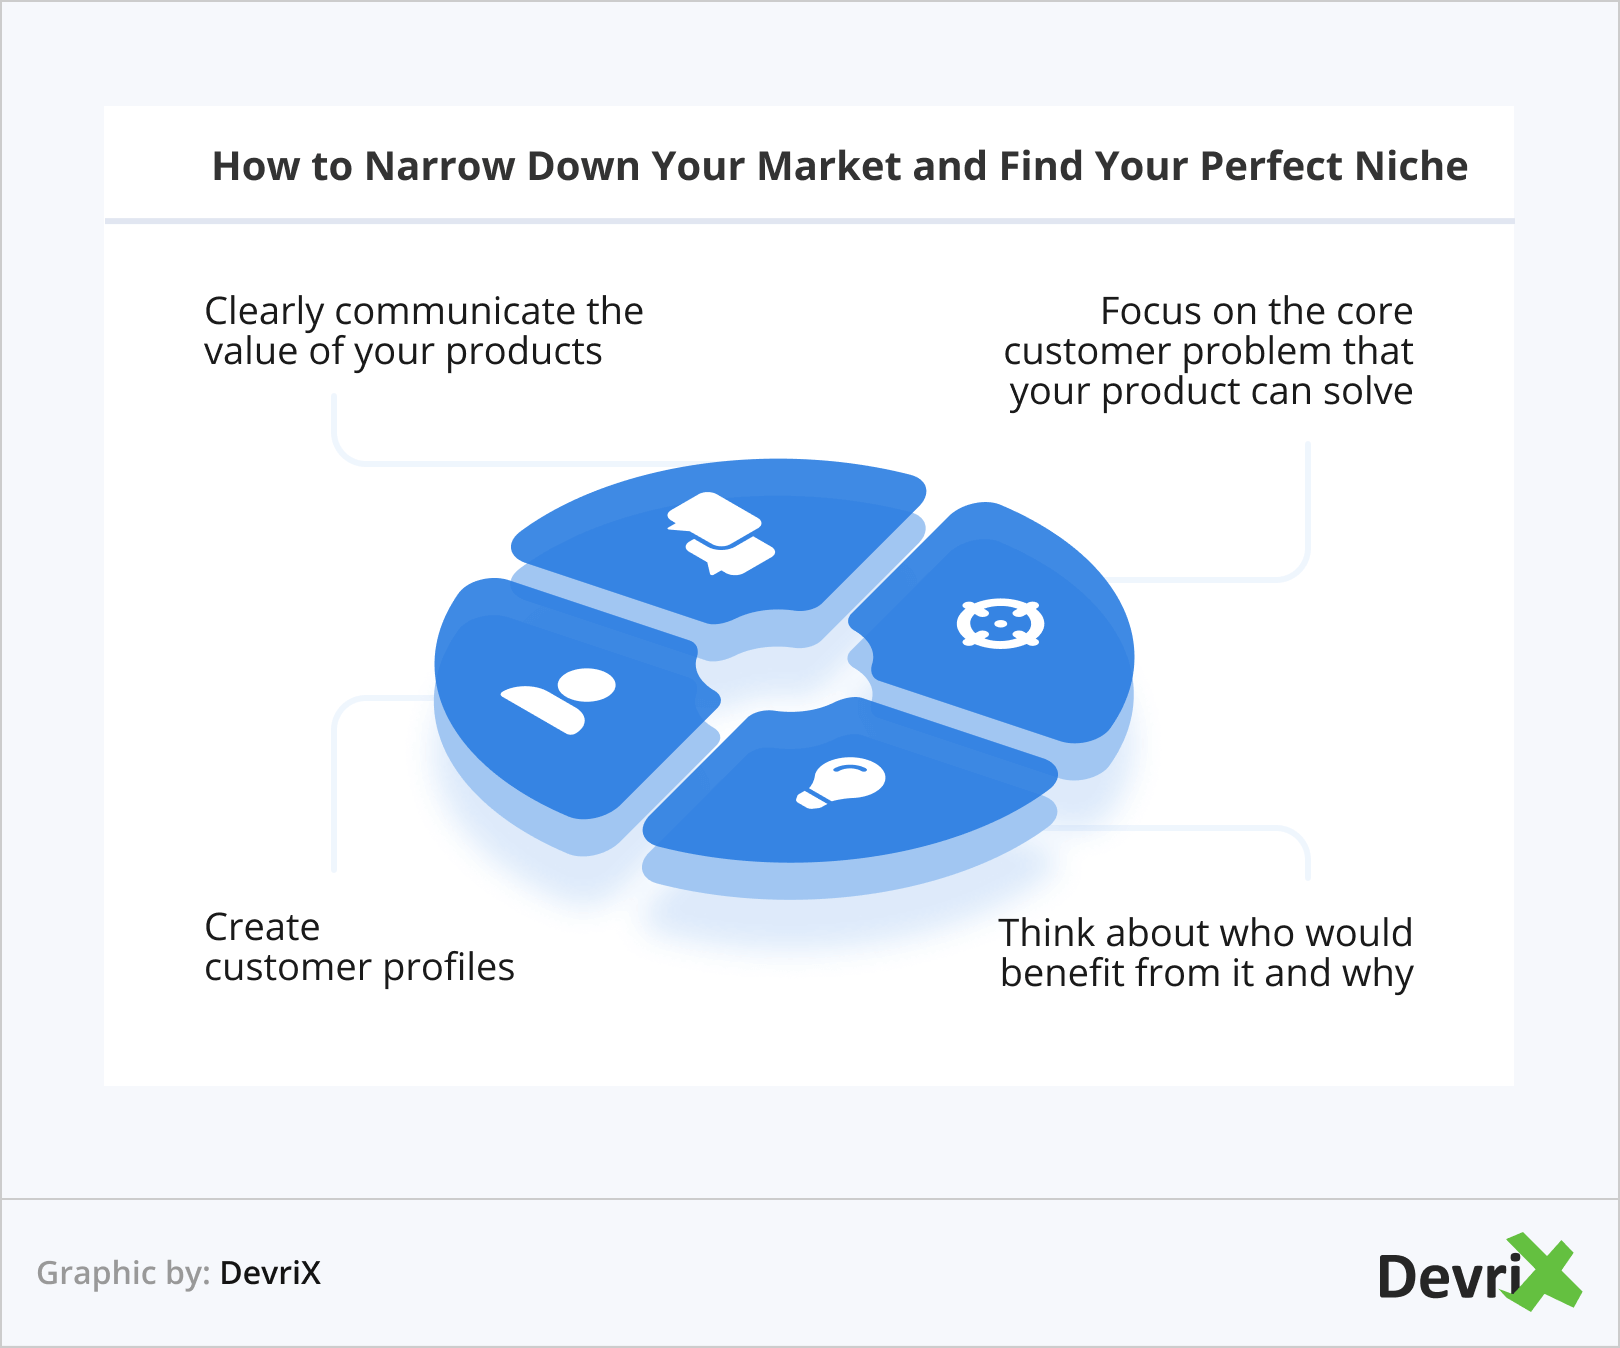 How to Narrow Down Your Market and Find Your Perfect Niche